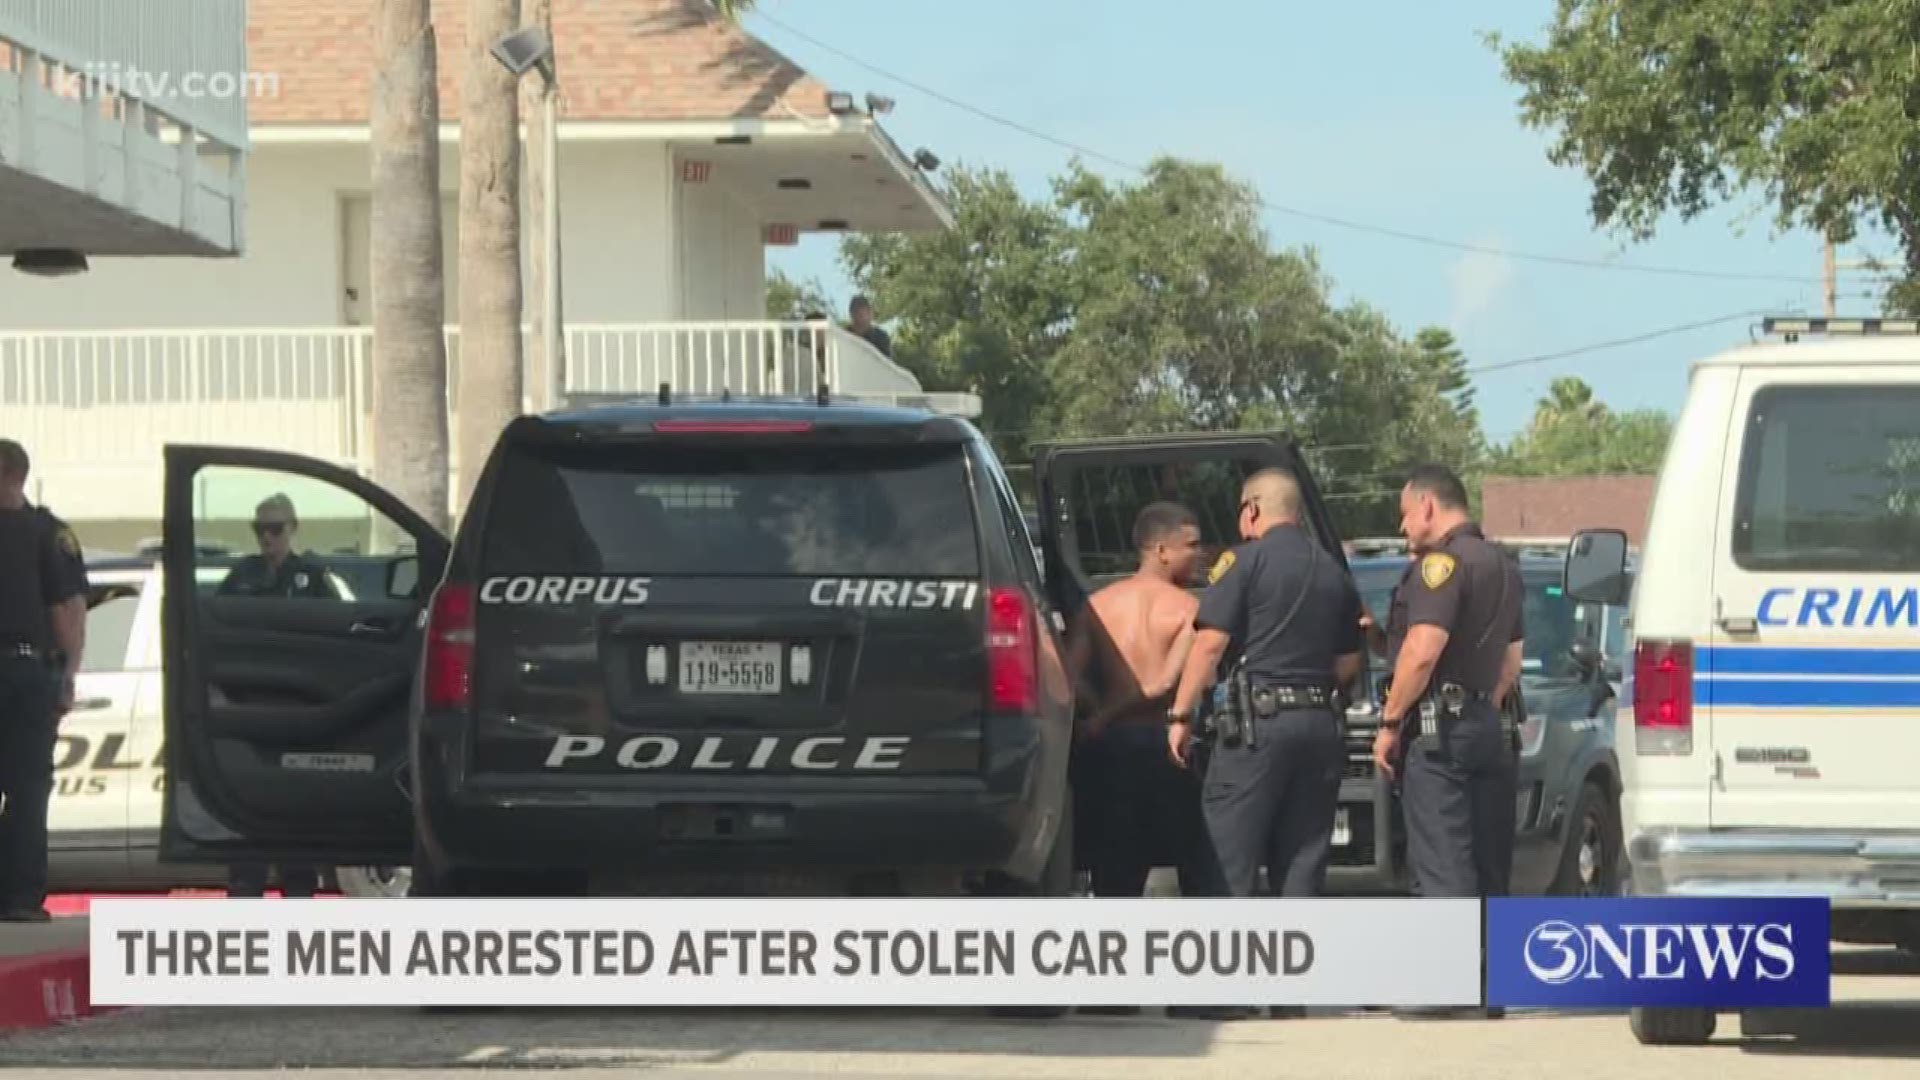 On Sunday, Corpus Christi police said three men led officers on a short foot chase after an officer spotted a stolen car.